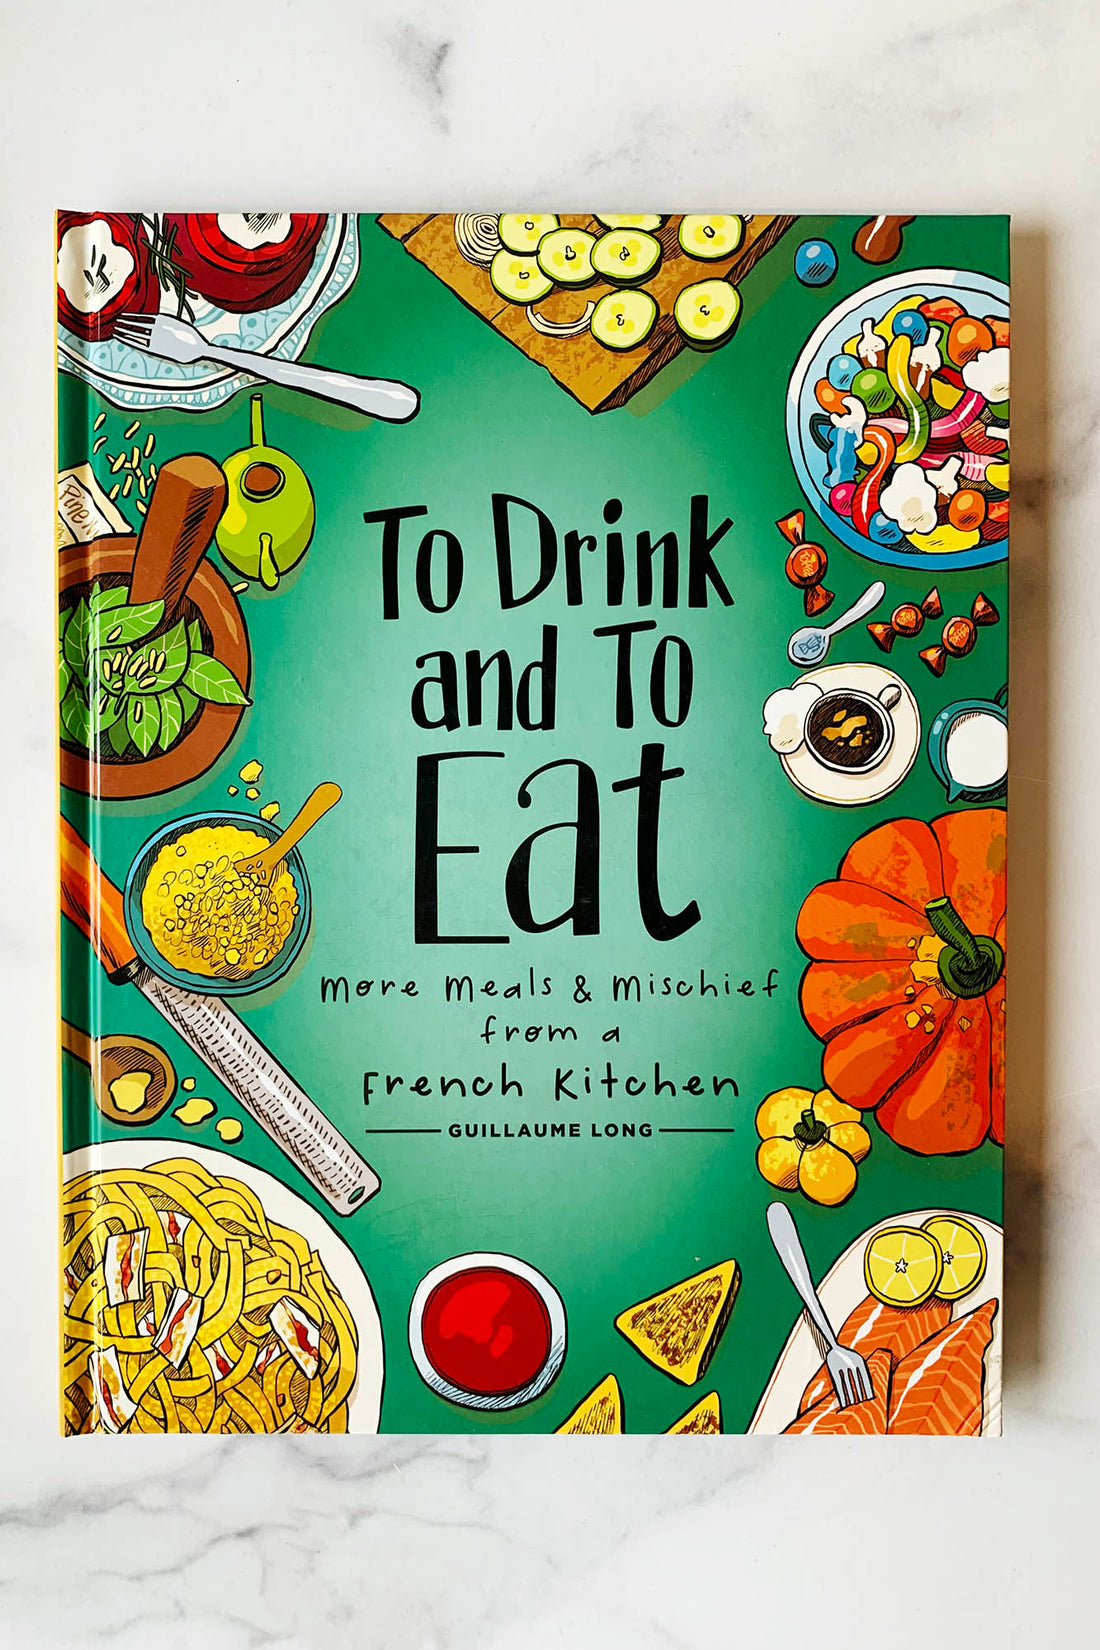 To Drink and To Eat: More Meals & Mischief